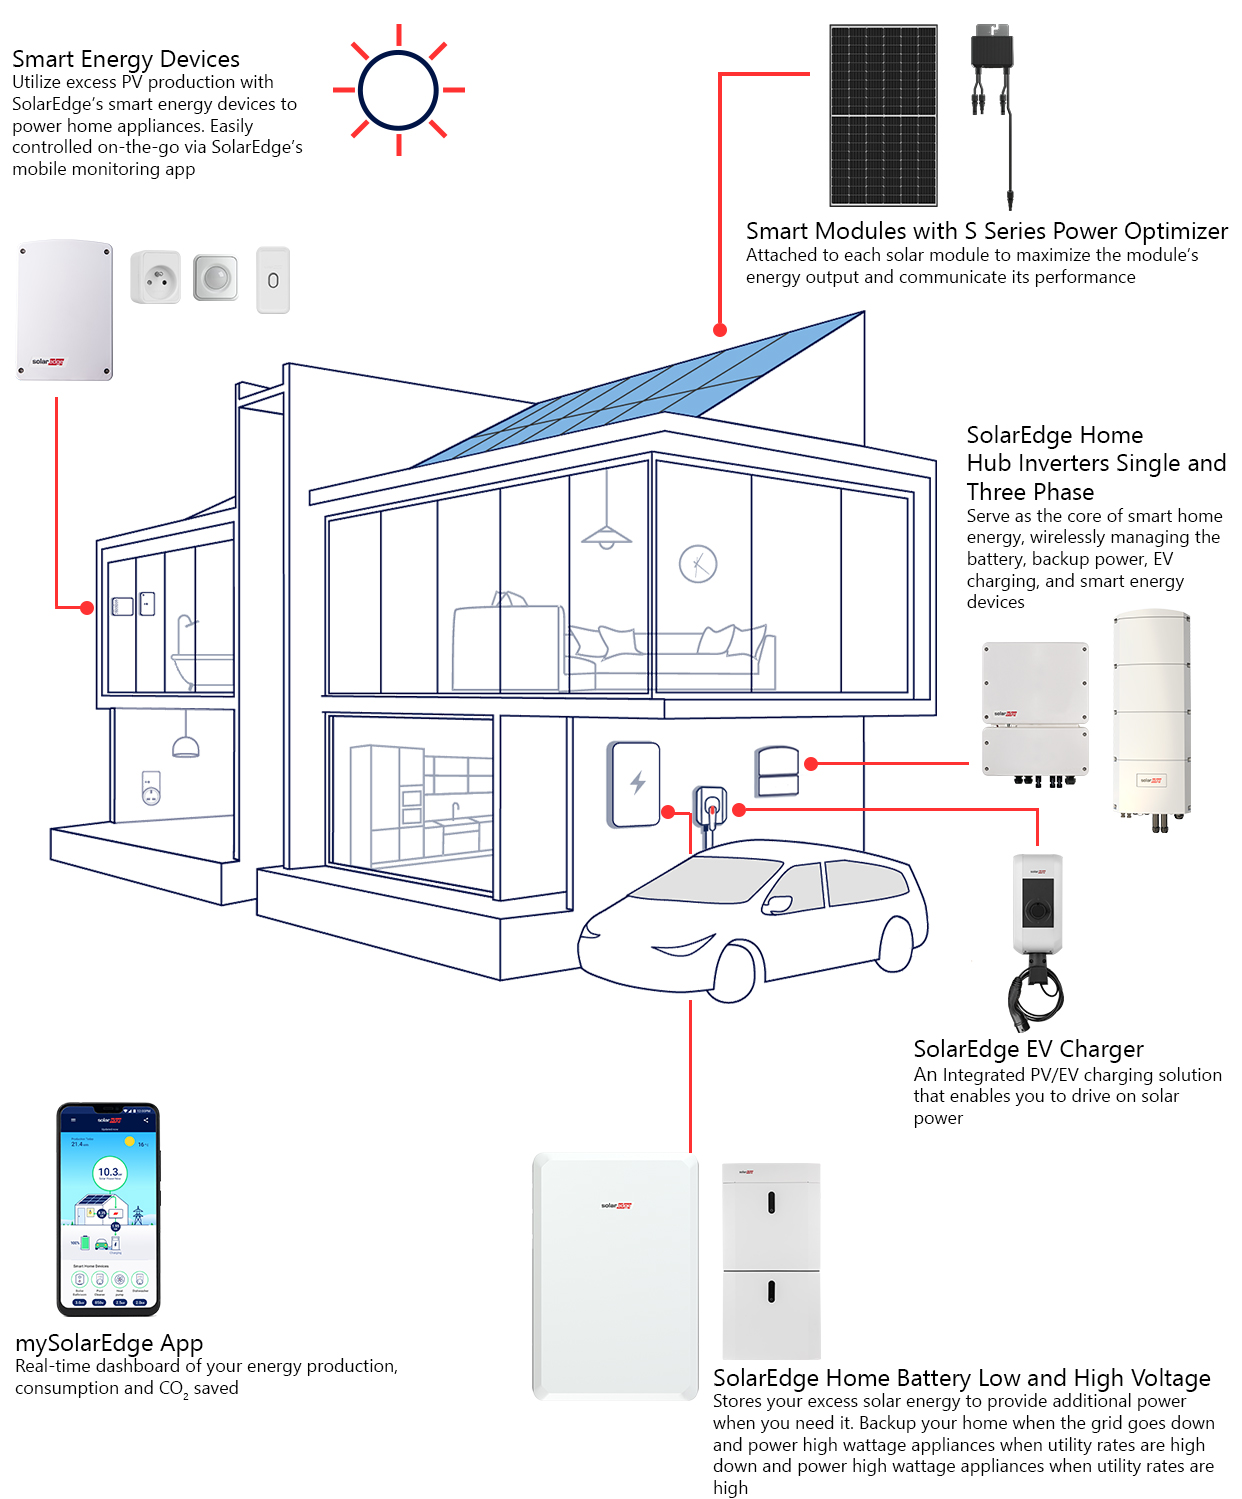 The Complete Residential Solution mobile